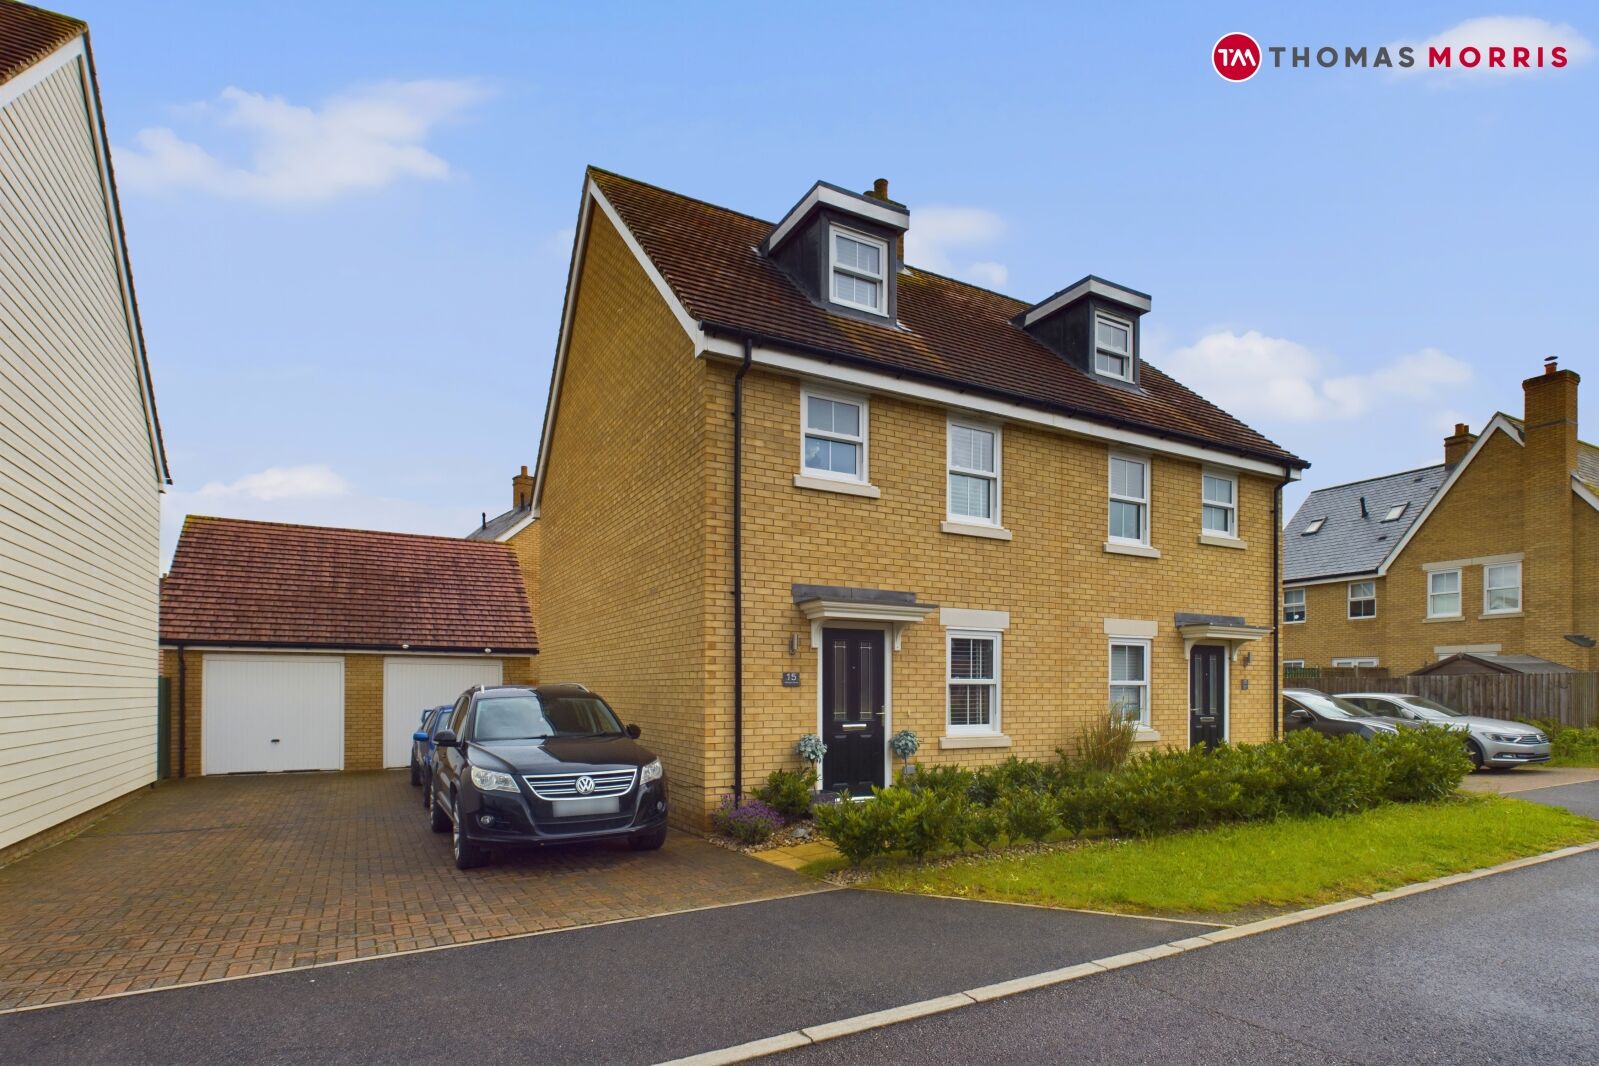 3 bedroom semi detached house for sale Wensum Grove, Biggleswade, SG18, main image